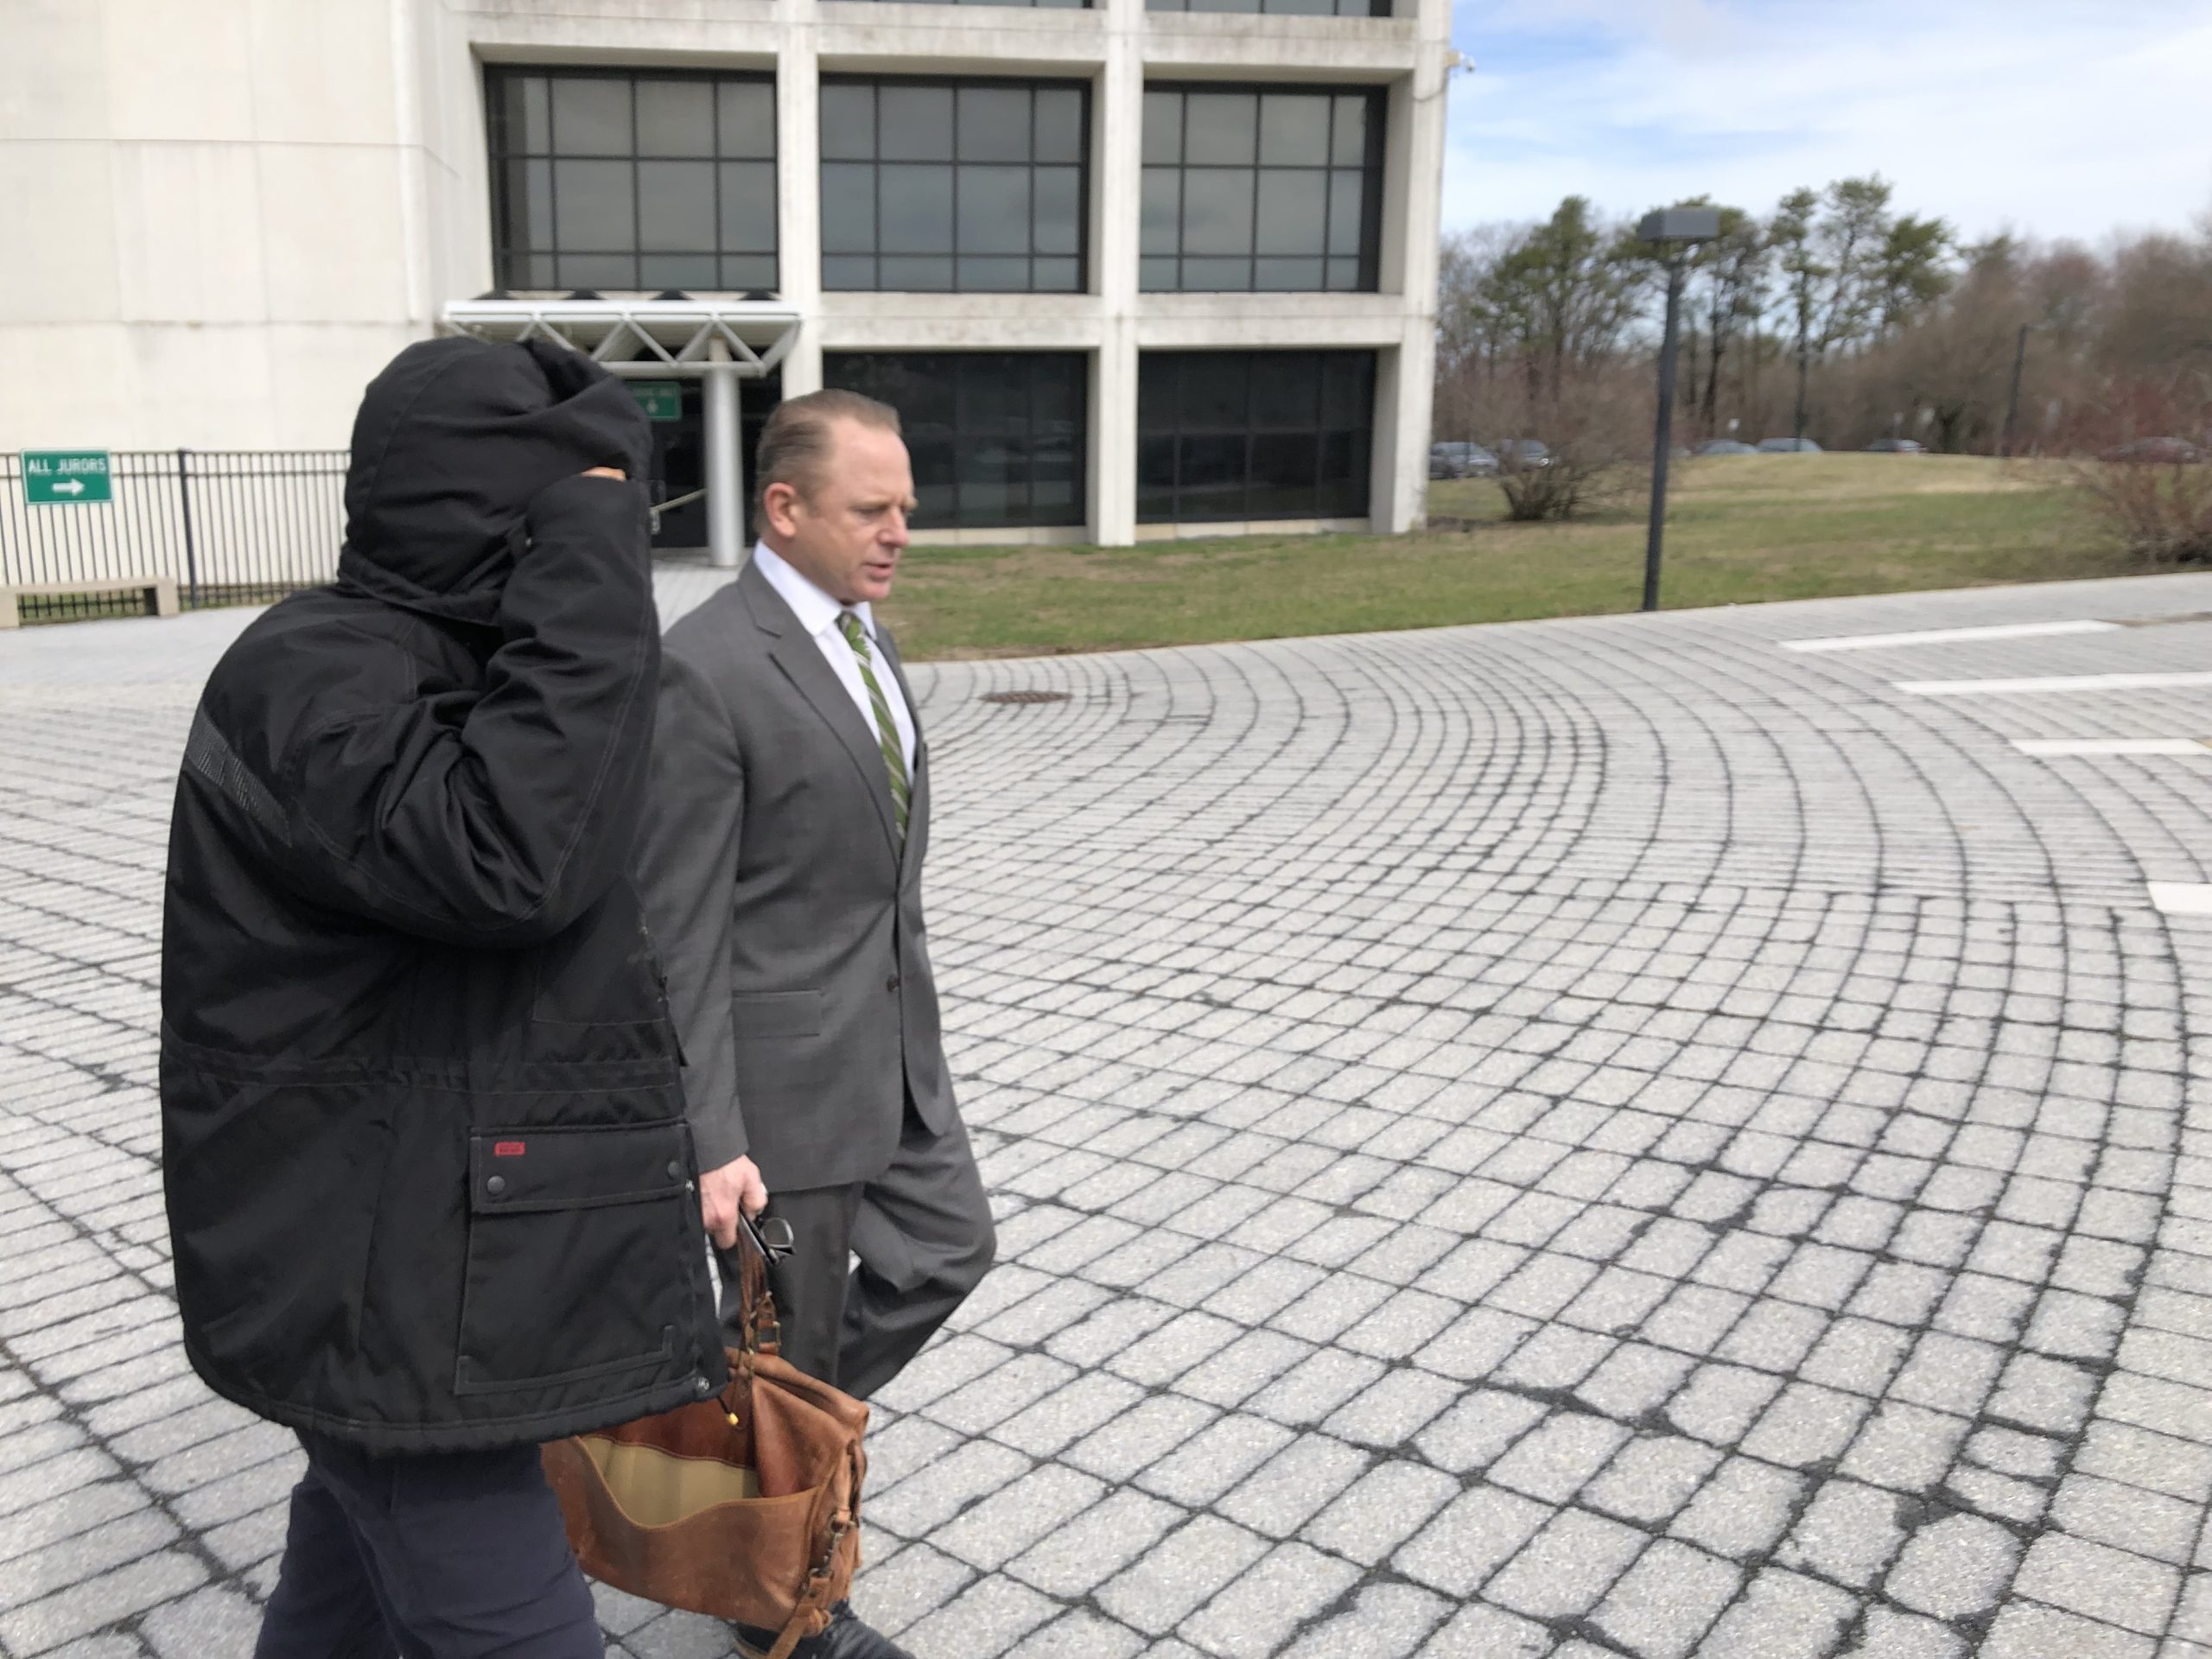 Jay Rowe with his attorney, Colin Astarita, at the courthouse on Friday. T. E. McMorrow